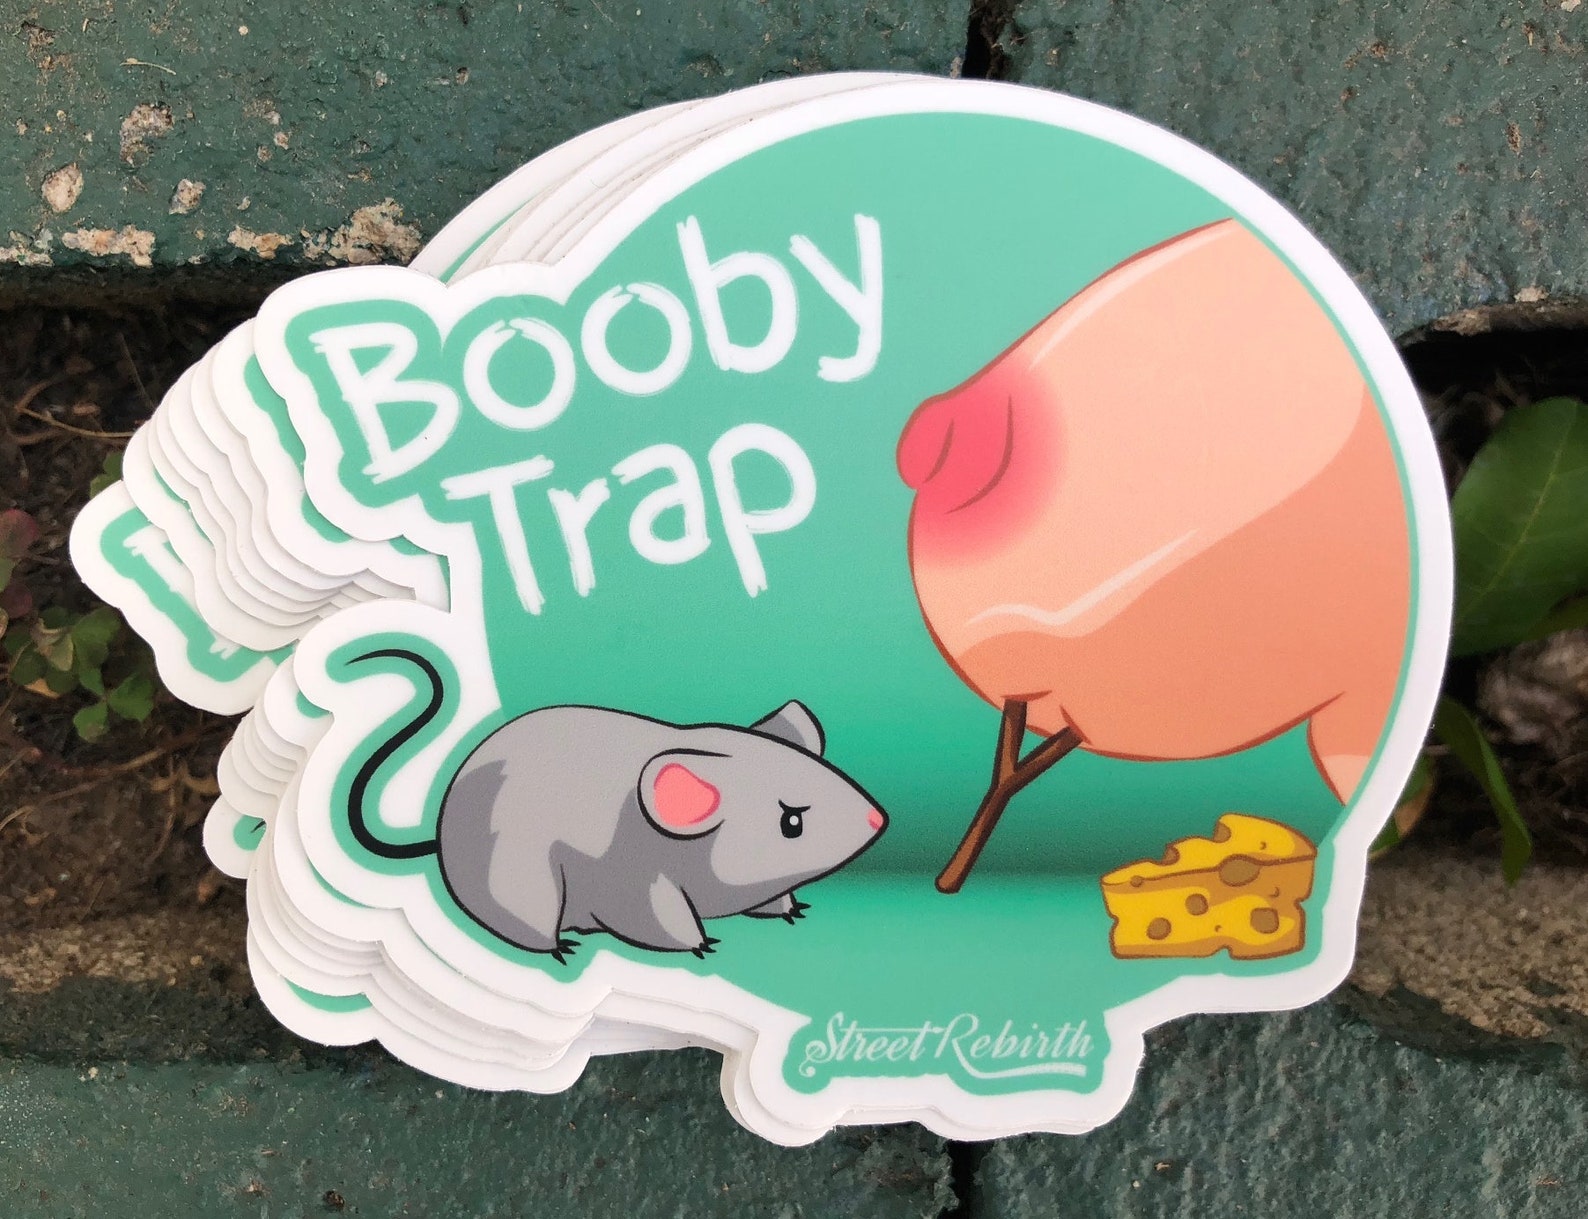 Booby trapping. Booby Trap. Bob Saget - Booby Trap. R6 Booby Trap. Трэп Стикеры.